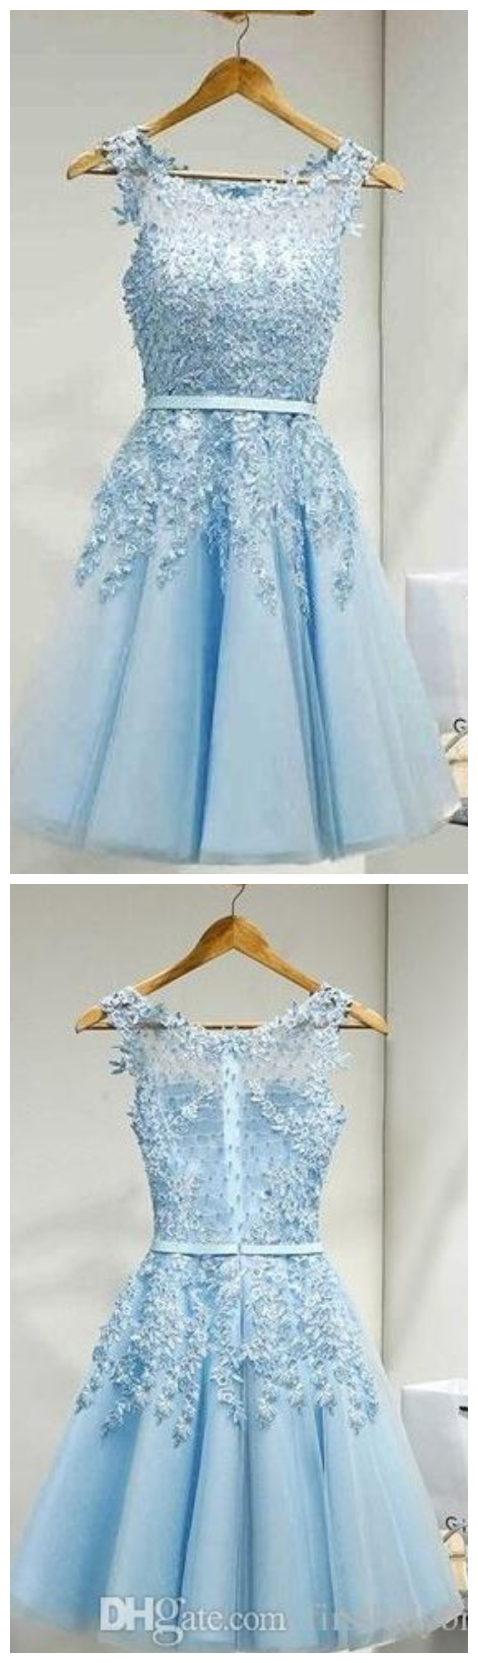 Light Sky Blue Short Homecoming Party Dresses Appliques Lace Real Photo ...